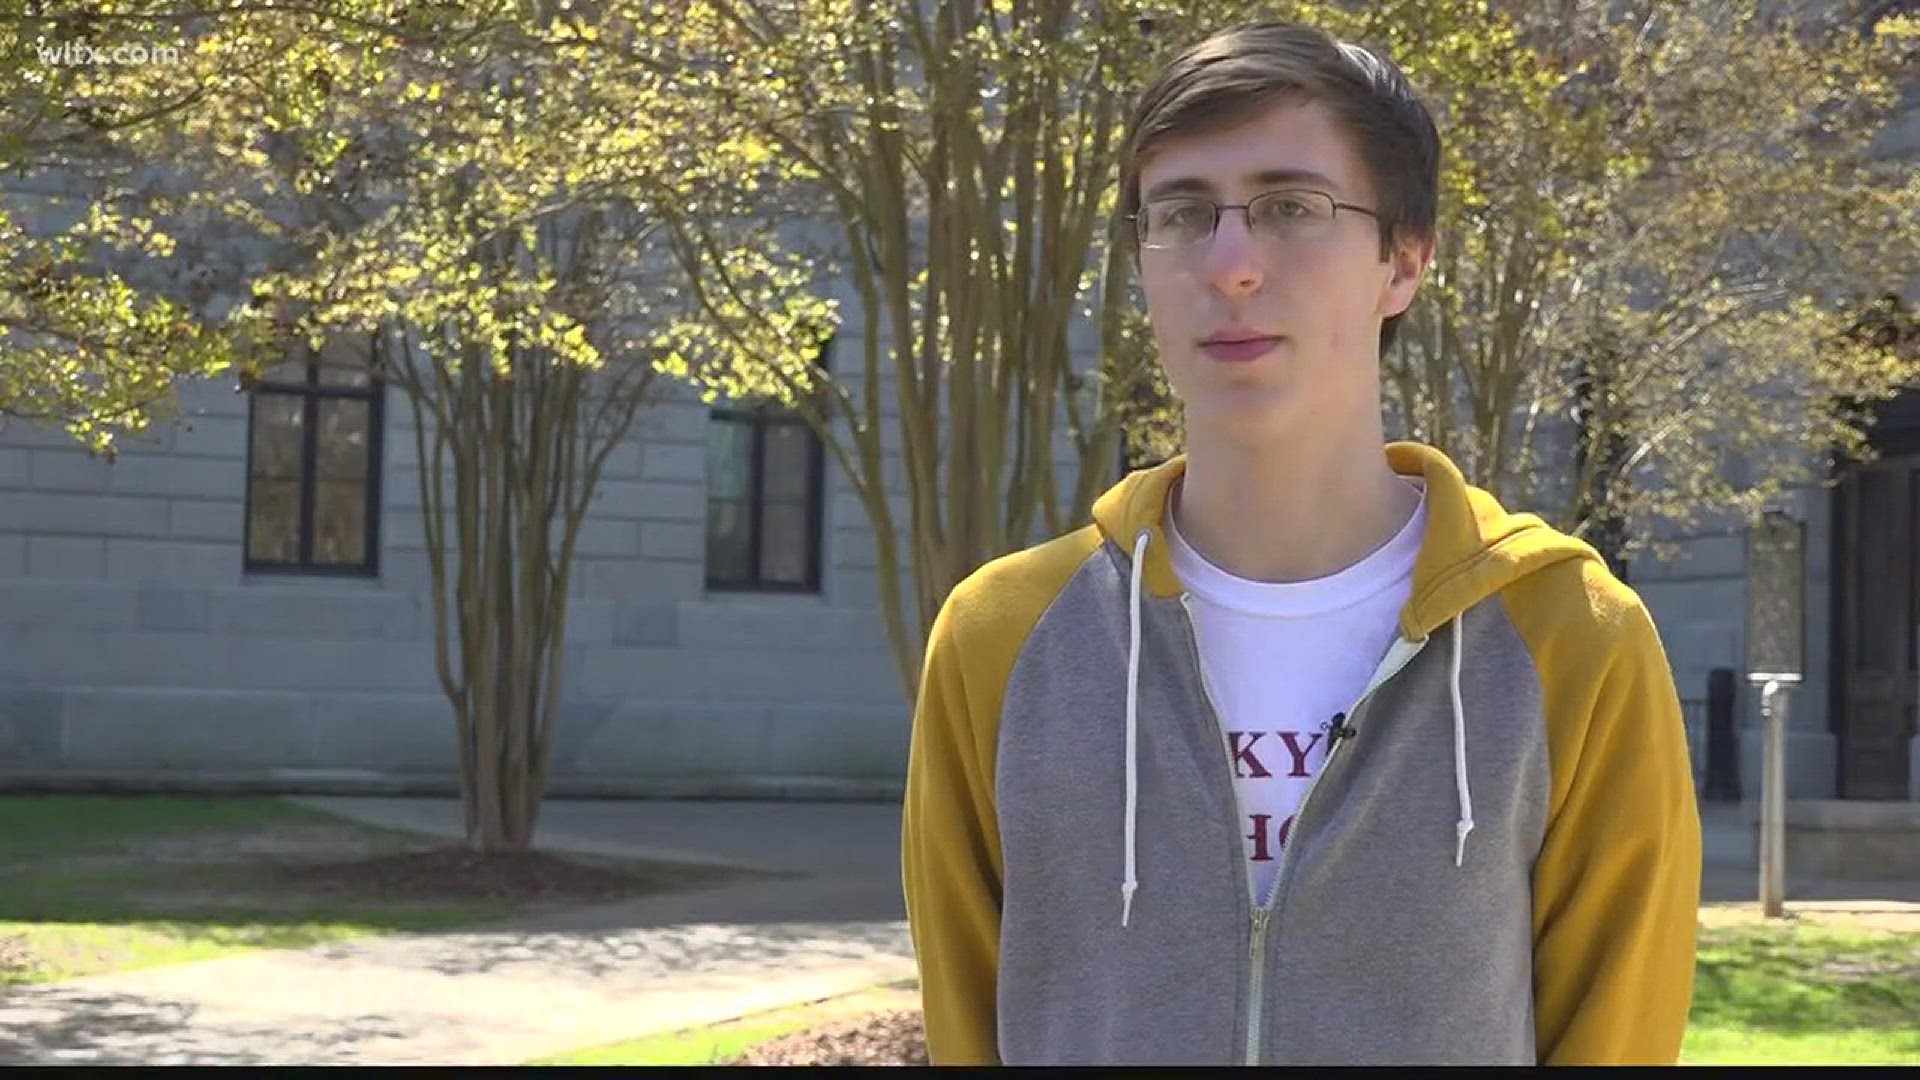 We caught up with a student volunteer who says he's marching to make a difference